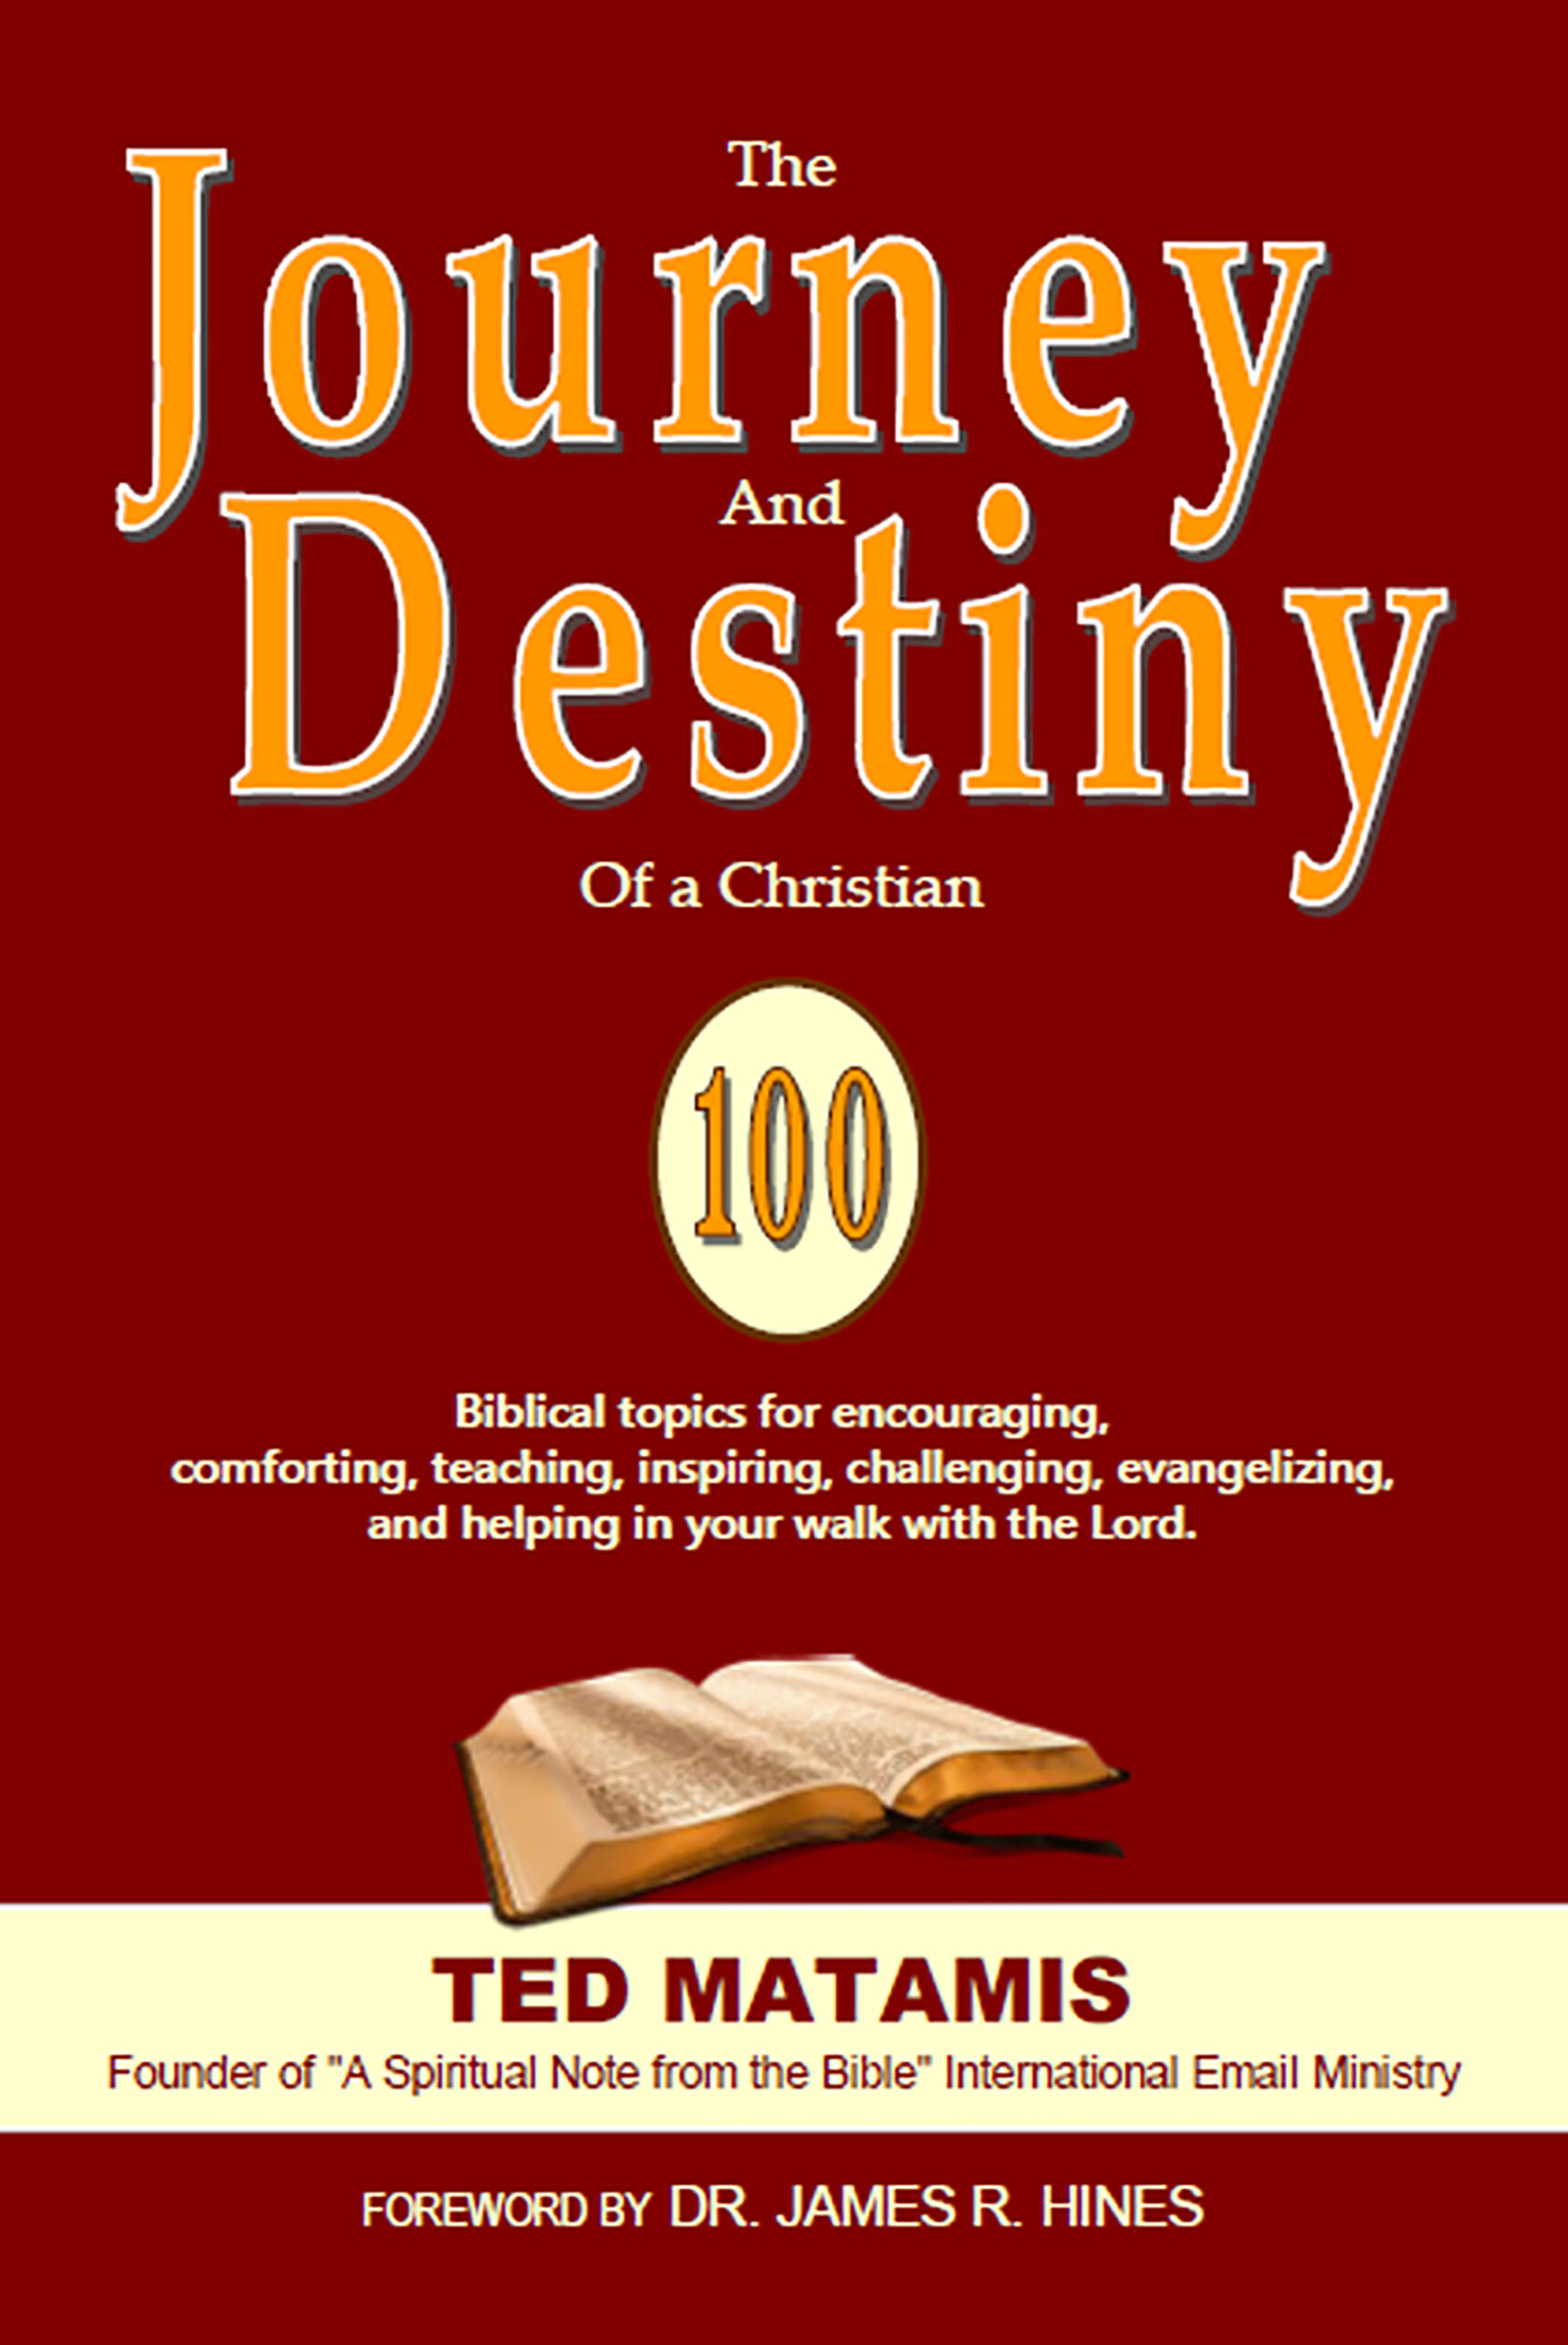 FREE: The JOURNEY and DESTINY of a Christian by Ted Matamis